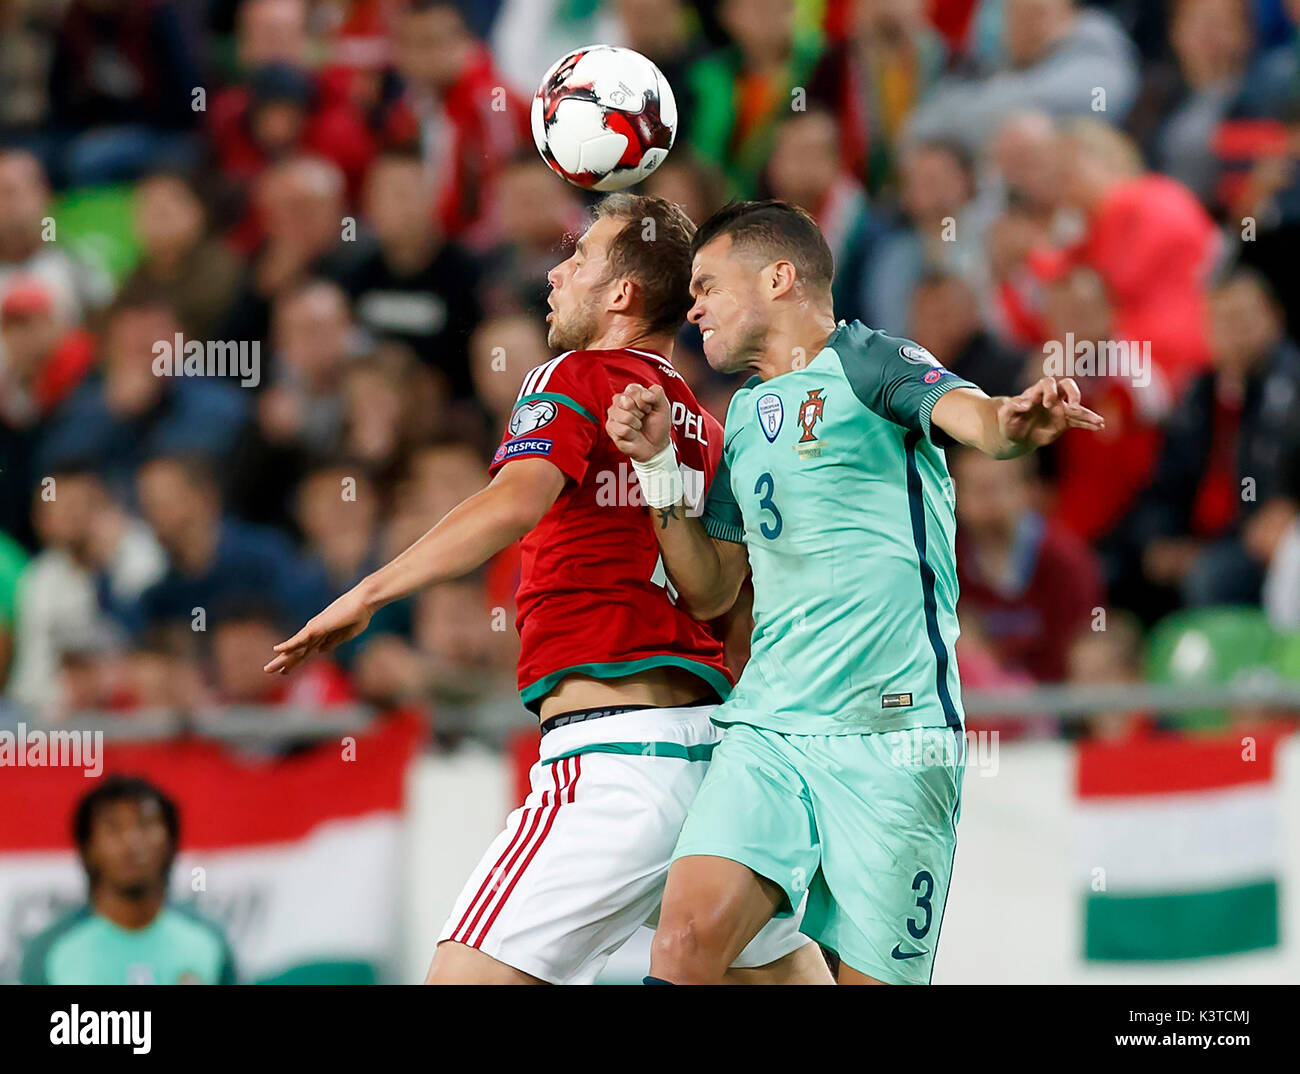 Budapest, Hungary. 03rd Sep, 2017. BUDAPEST, HUNGARY - SEPTEMBER 3: Marton Eppel (L) of Hungary fights for the ball in the air with Pepe #3 of Portugal during the FIFA 2018 World Cup Qualifier match between Hungary and Portugal at Groupama Arena on September 3, 2017 in Budapest, Hungary. Credit: Laszlo Szirtesi/Alamy Live News Stock Photo